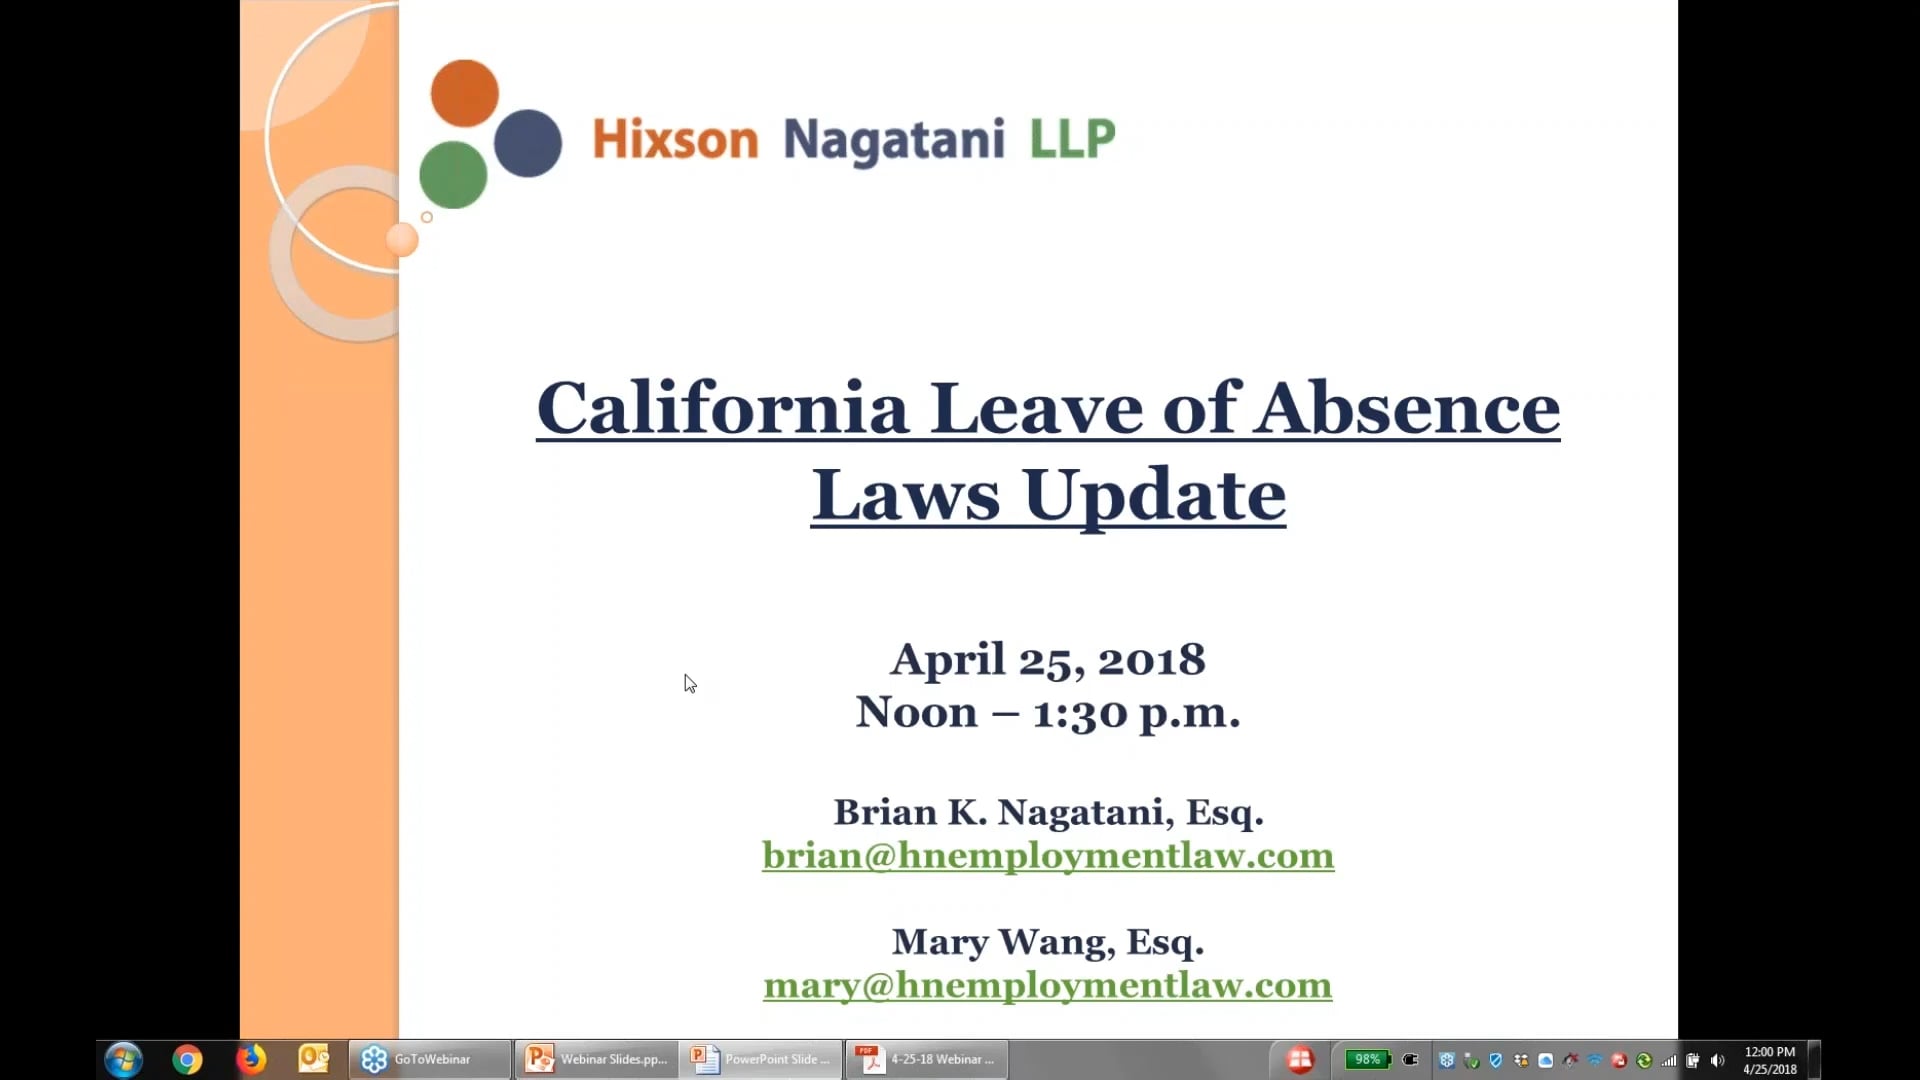 California Leave of Absence Laws Update on Vimeo